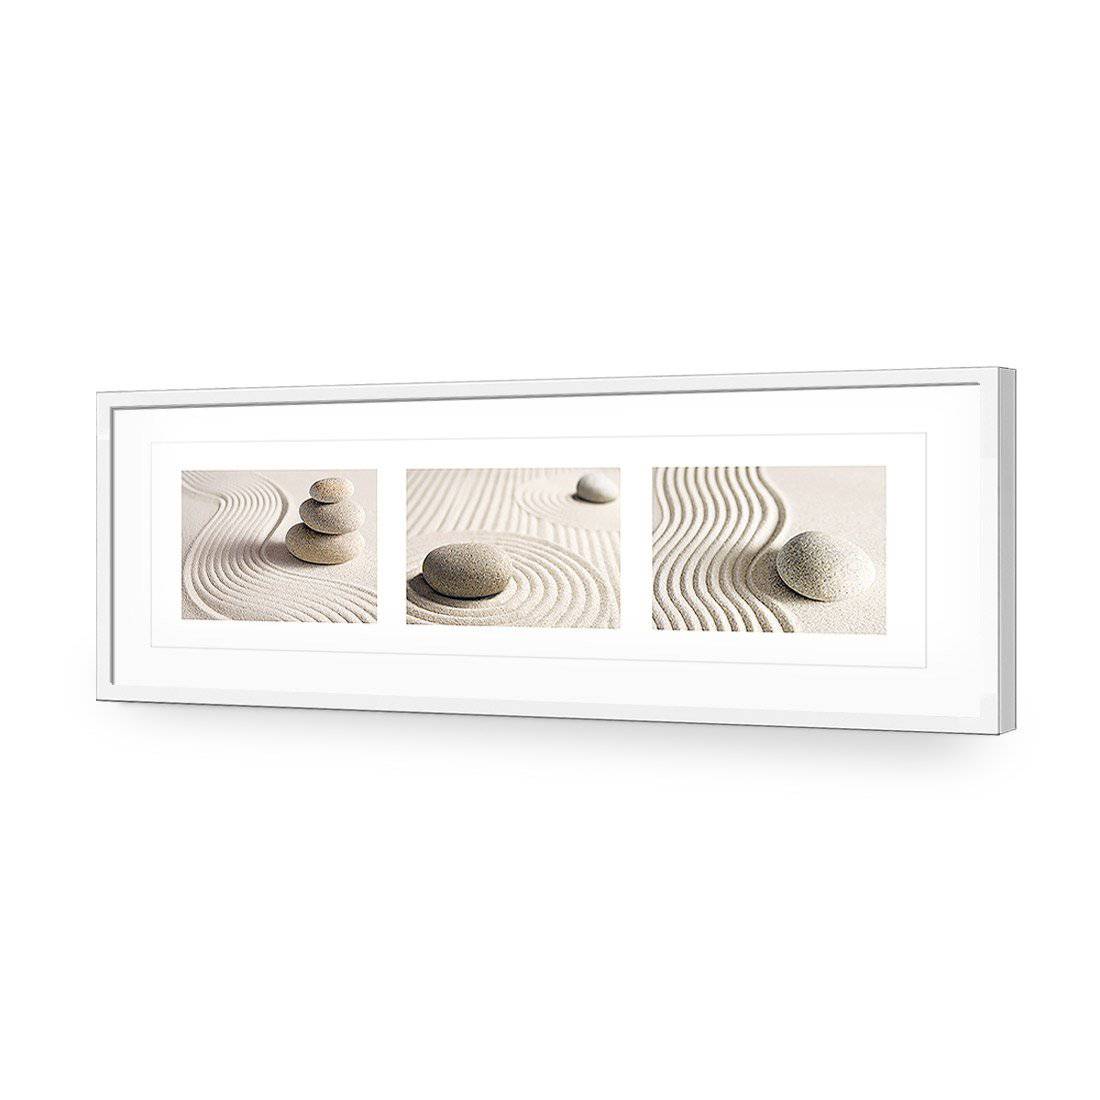 Sand Stone Montage, Long-Acrylic-Wall Art Design-With Border-Acrylic - White Frame-60x20cm-Wall Art Designs